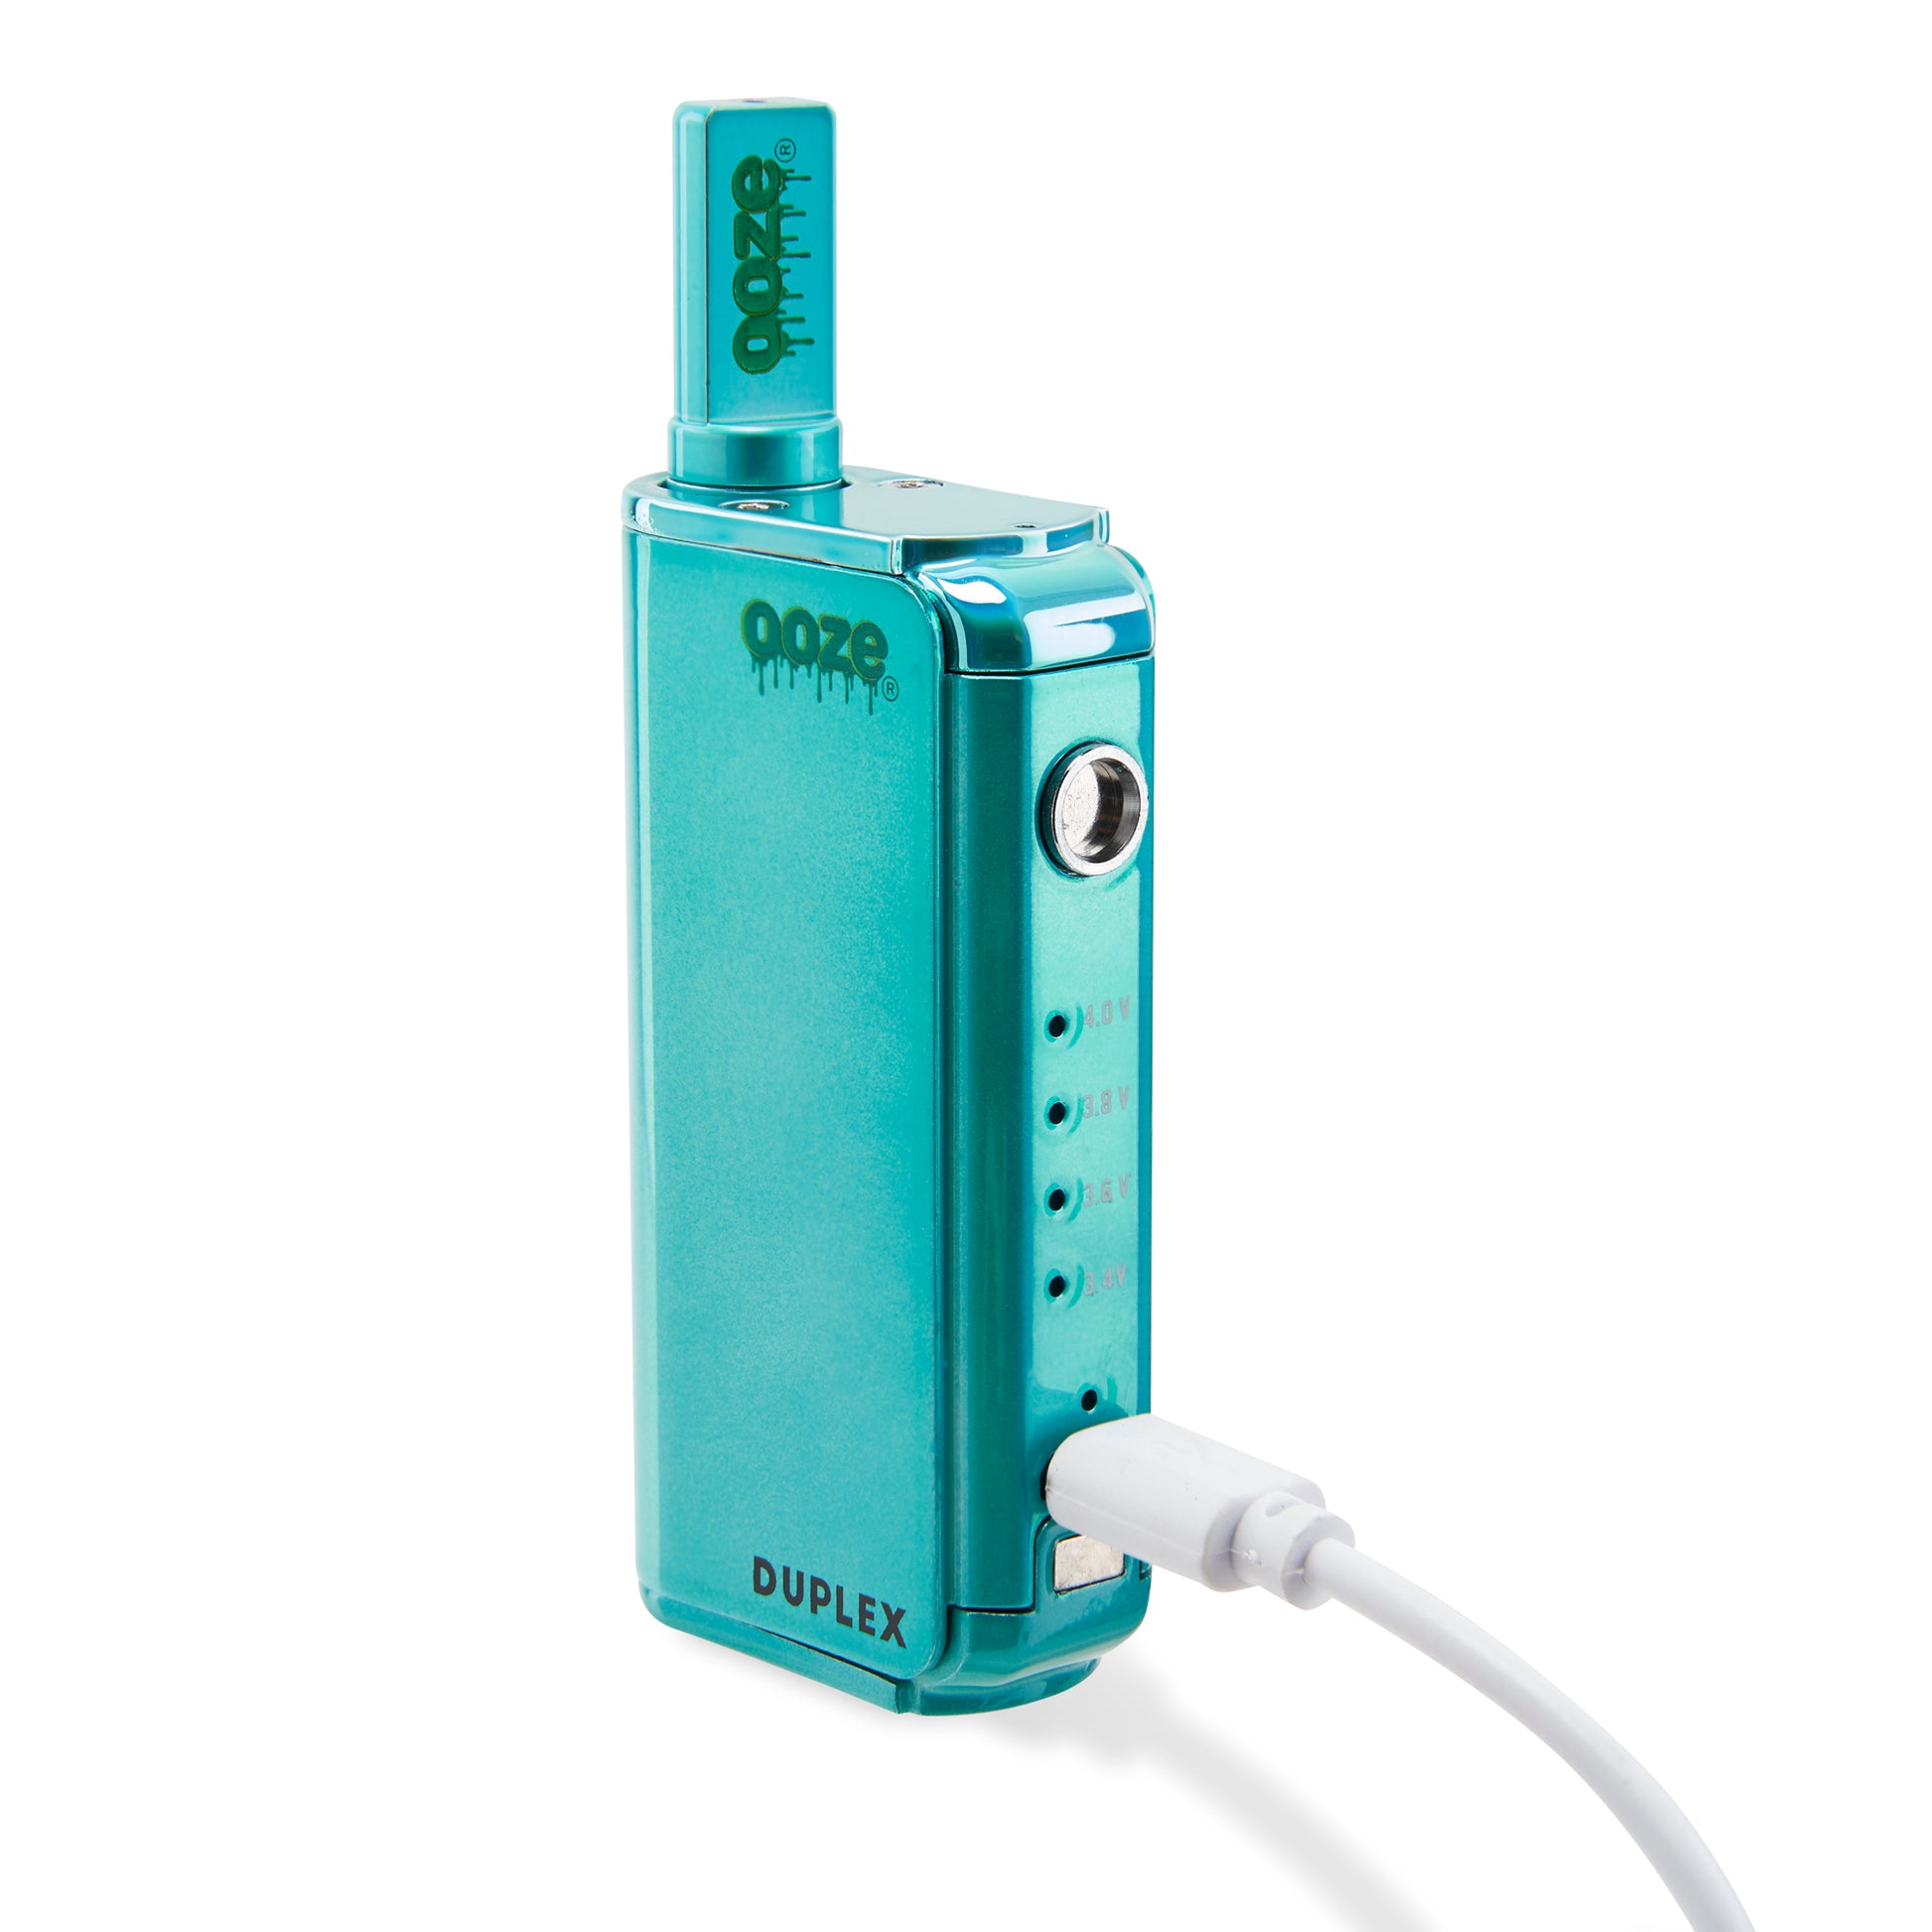 The Arctic Blue Ooze Duplex Pro Vaporizer is shown with the trigger button plate removed and the type-C charger plugged in.